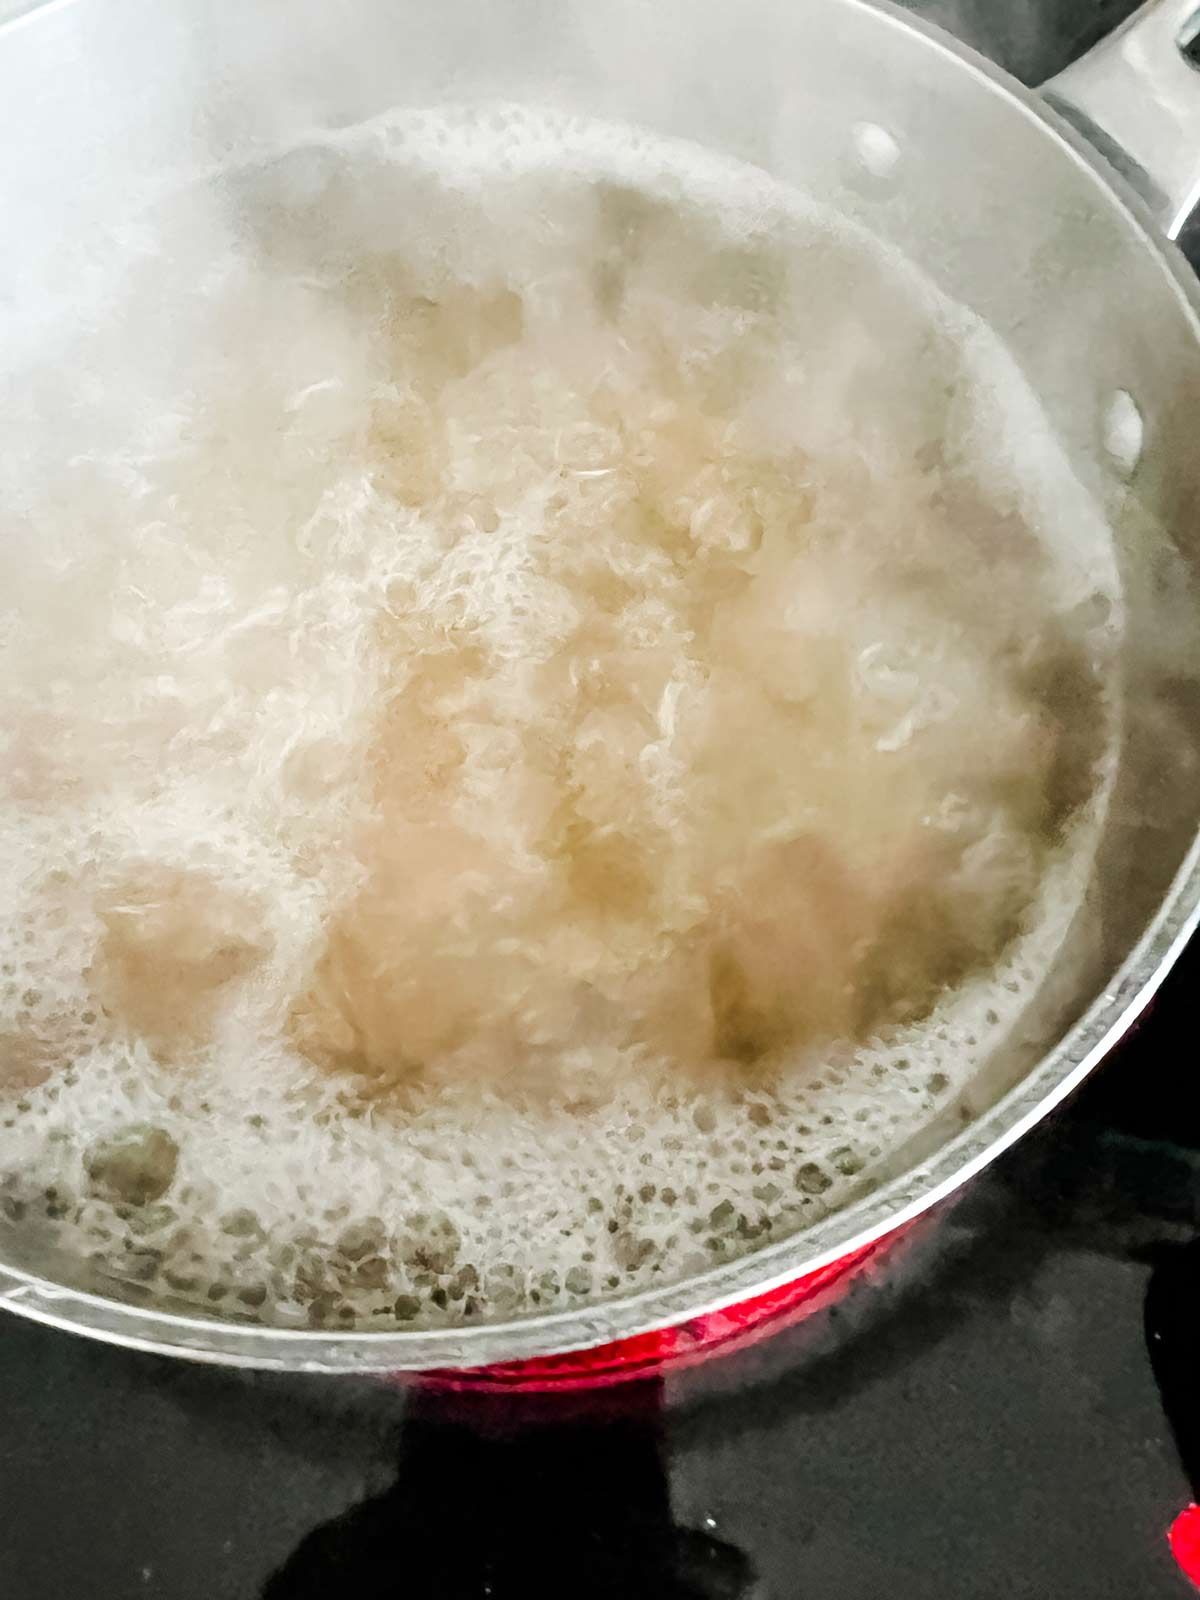 Pasta in boiling water.